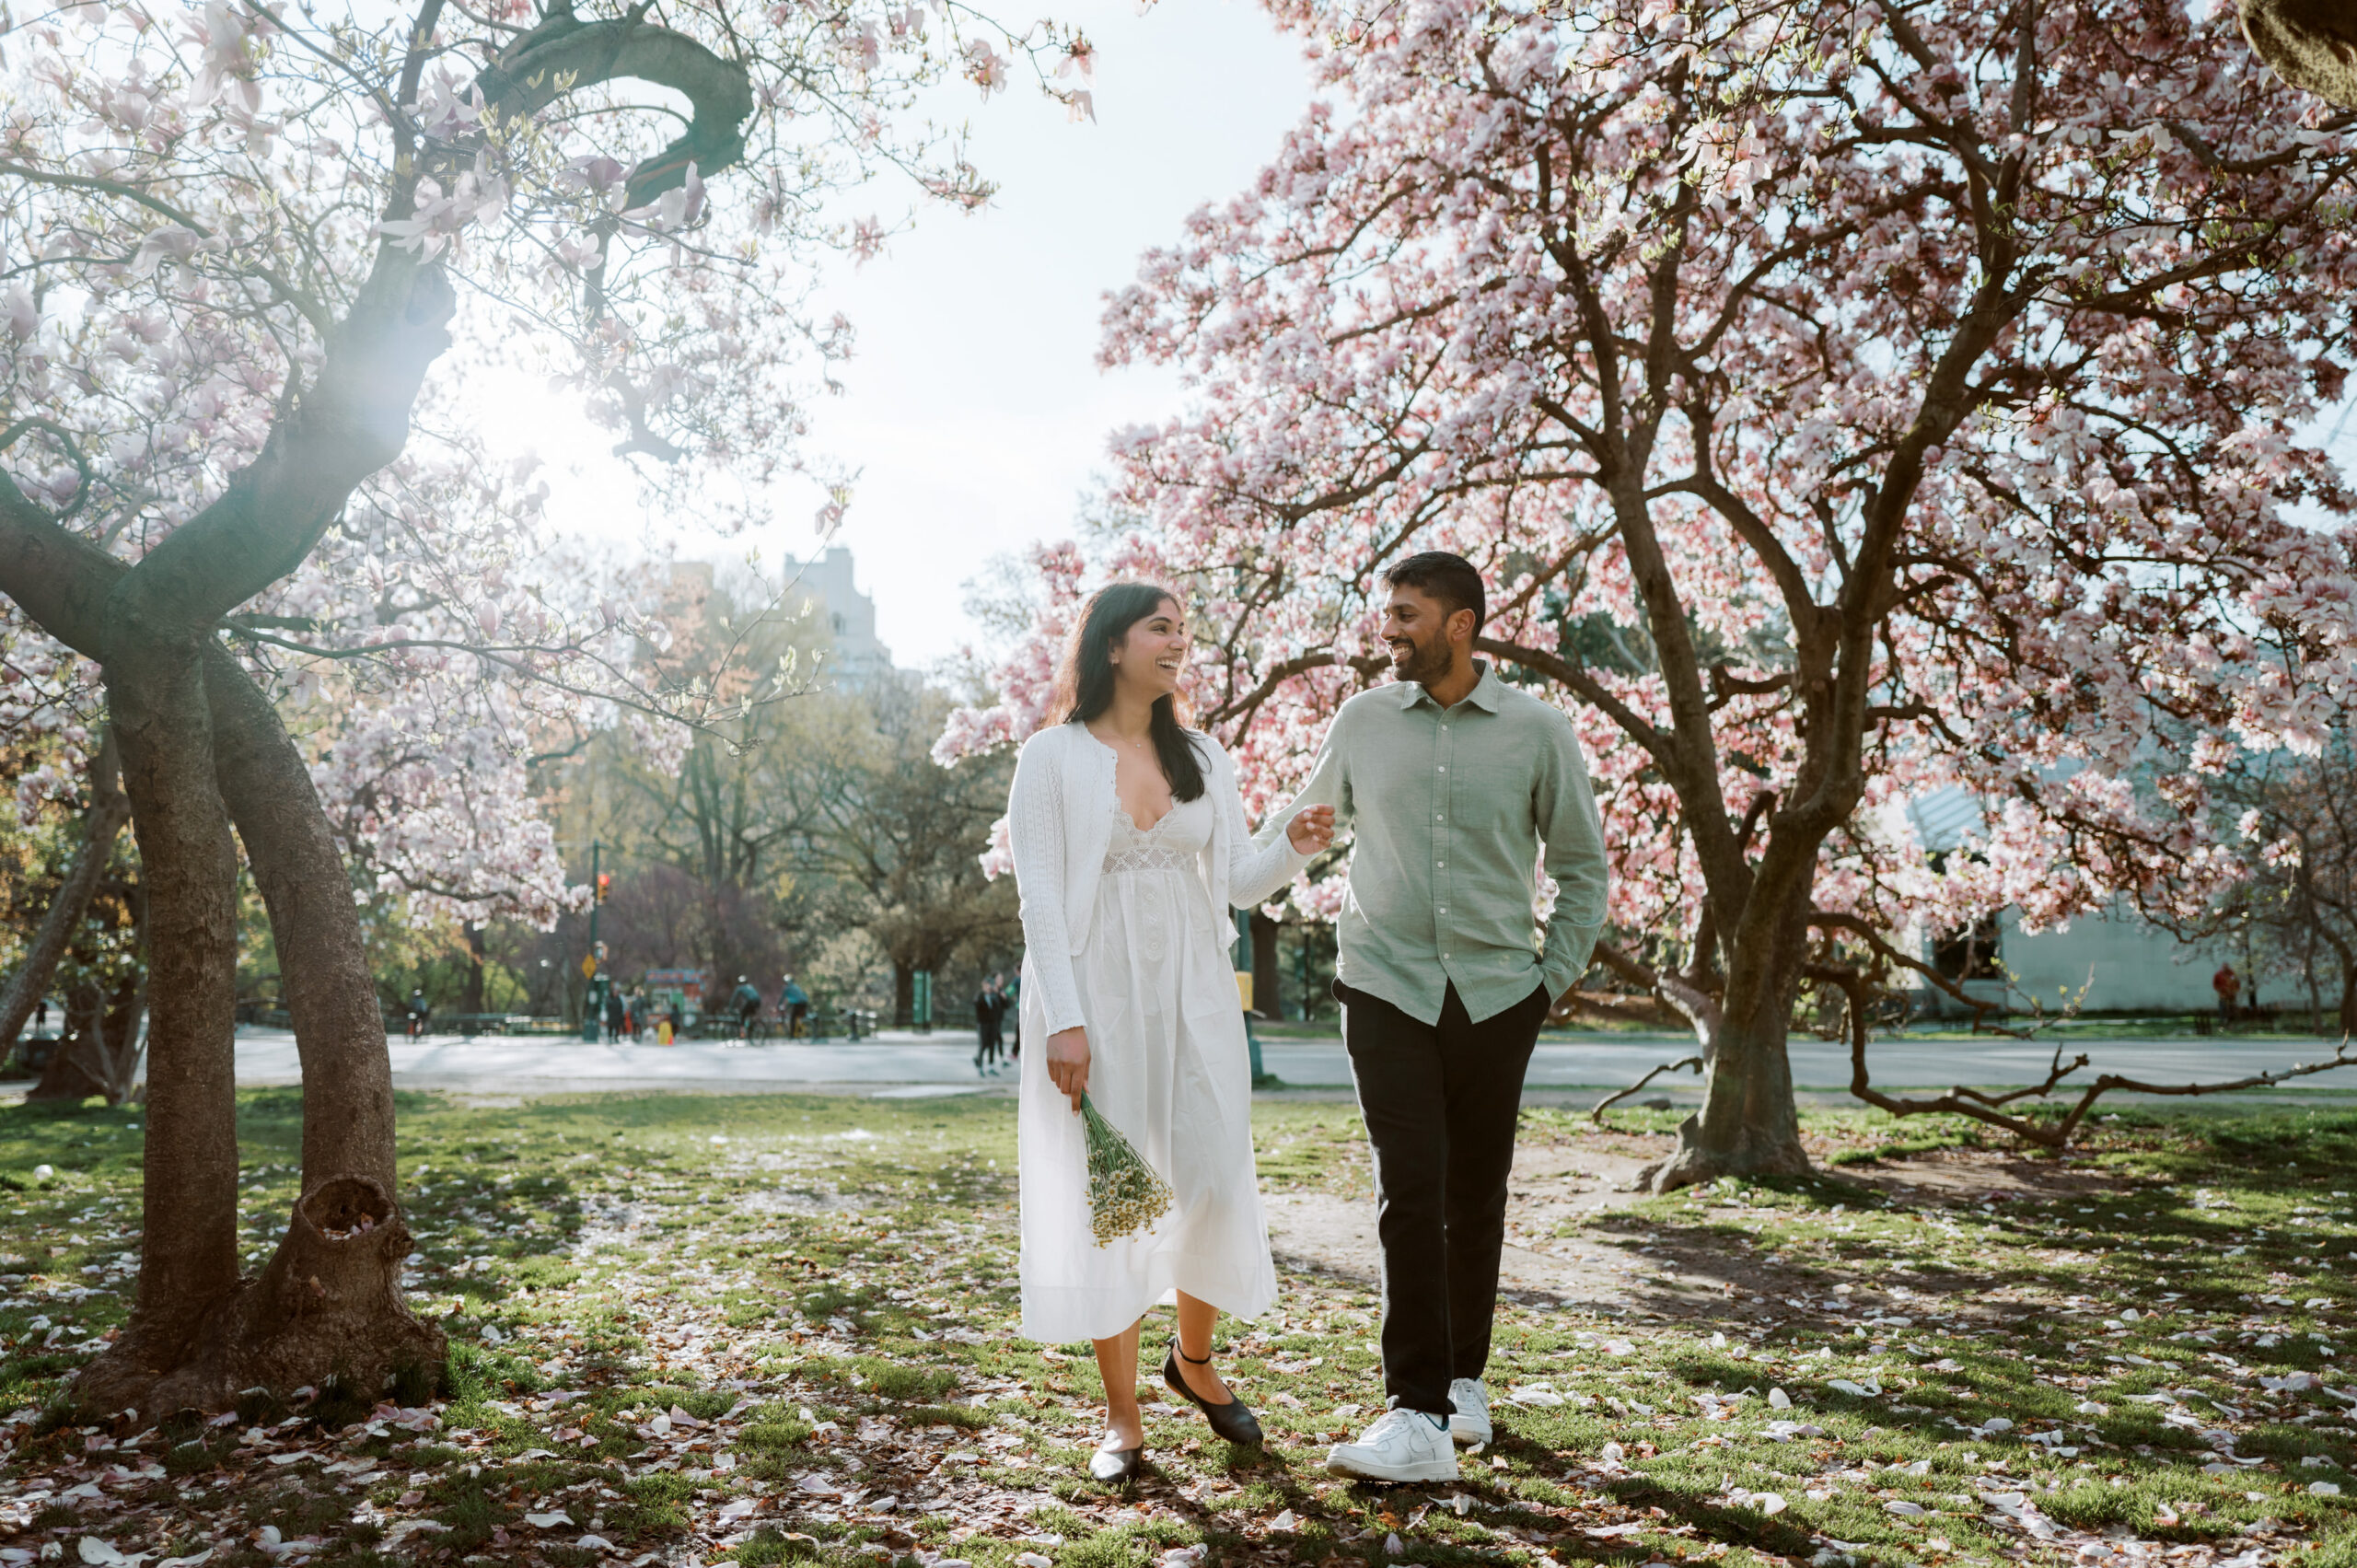 Photojournalistic engagement photo in the middle of Central Park, NYC, in spring, with cherry blossom trees in the background. Image by Jenny Fu Studio